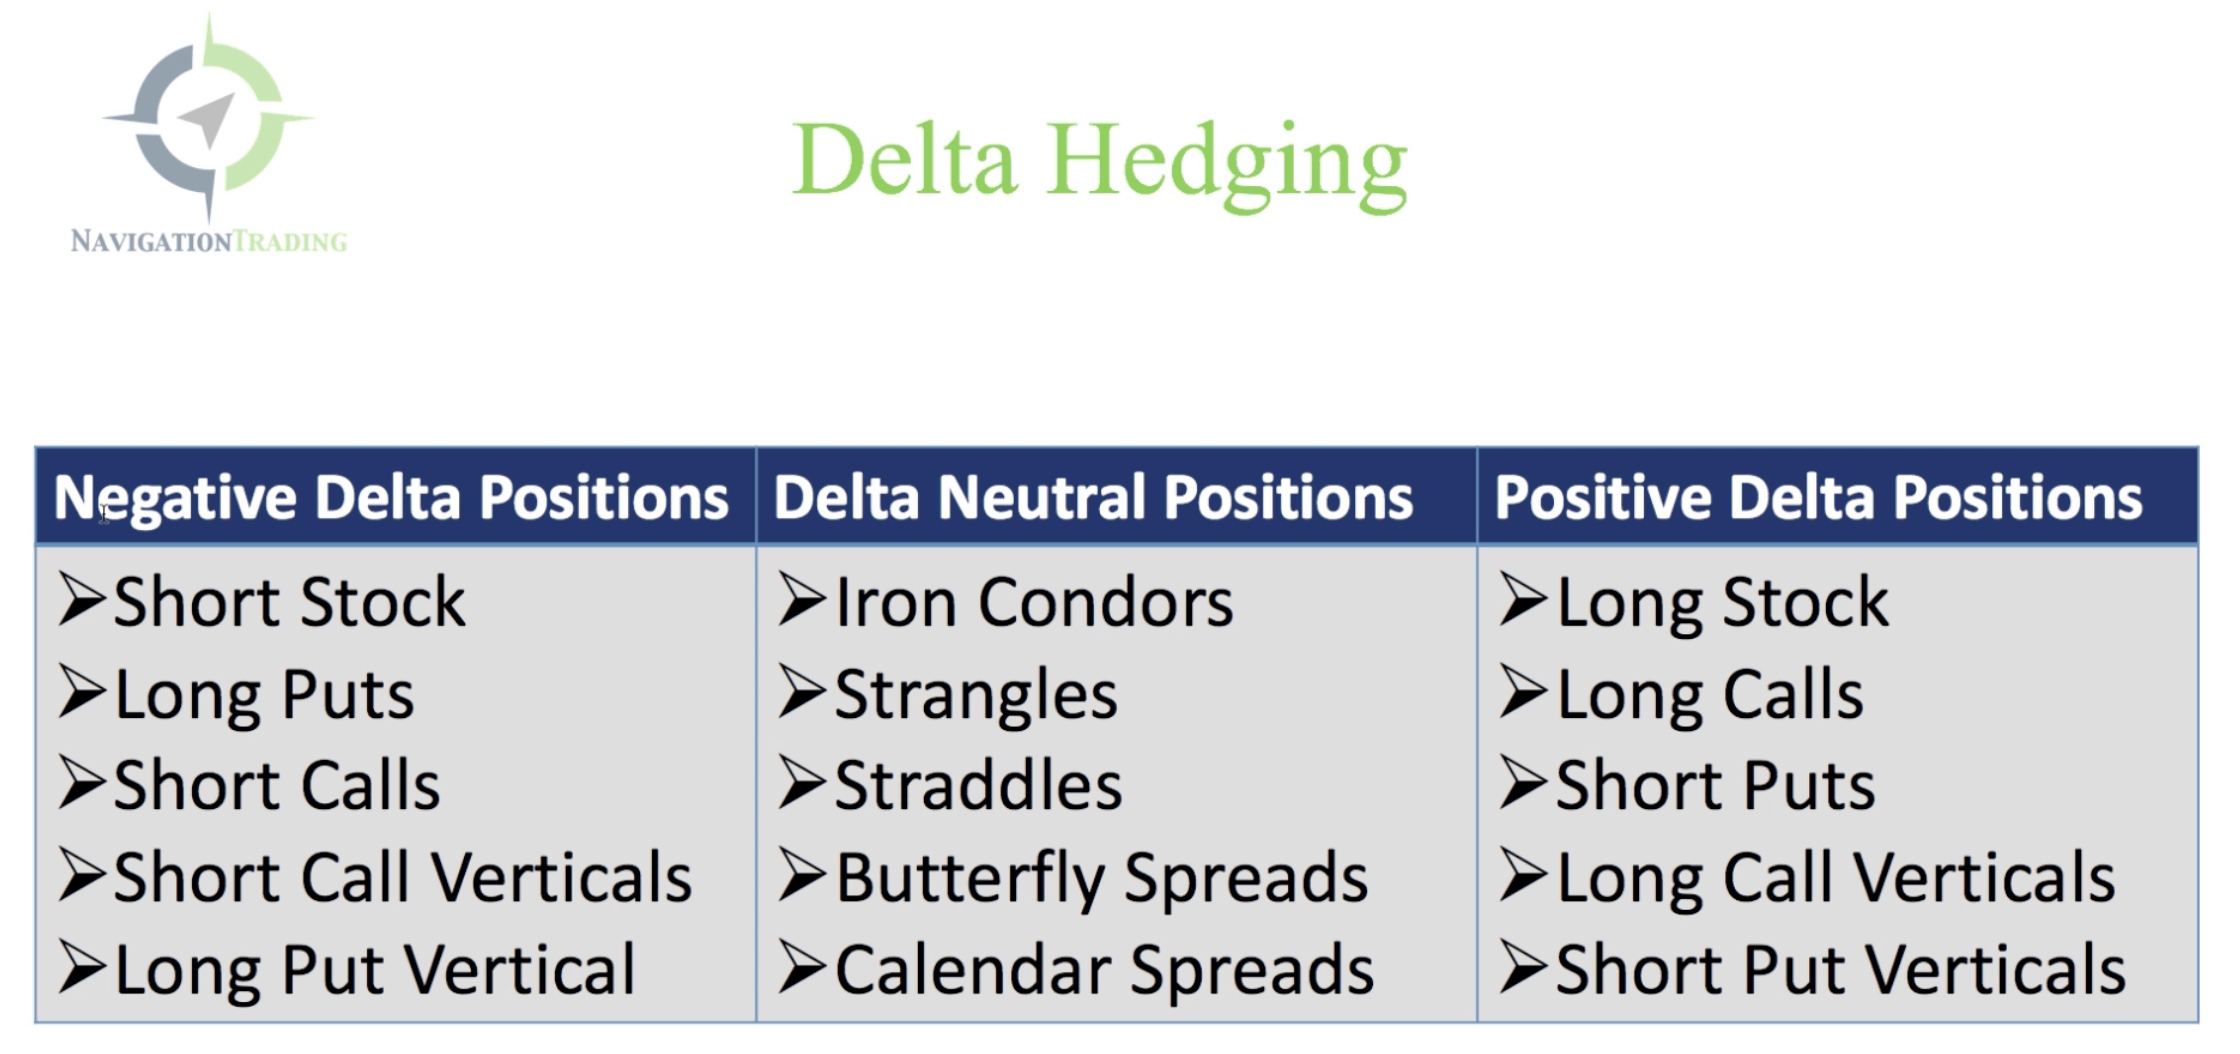 Delta Hedging List of Positions